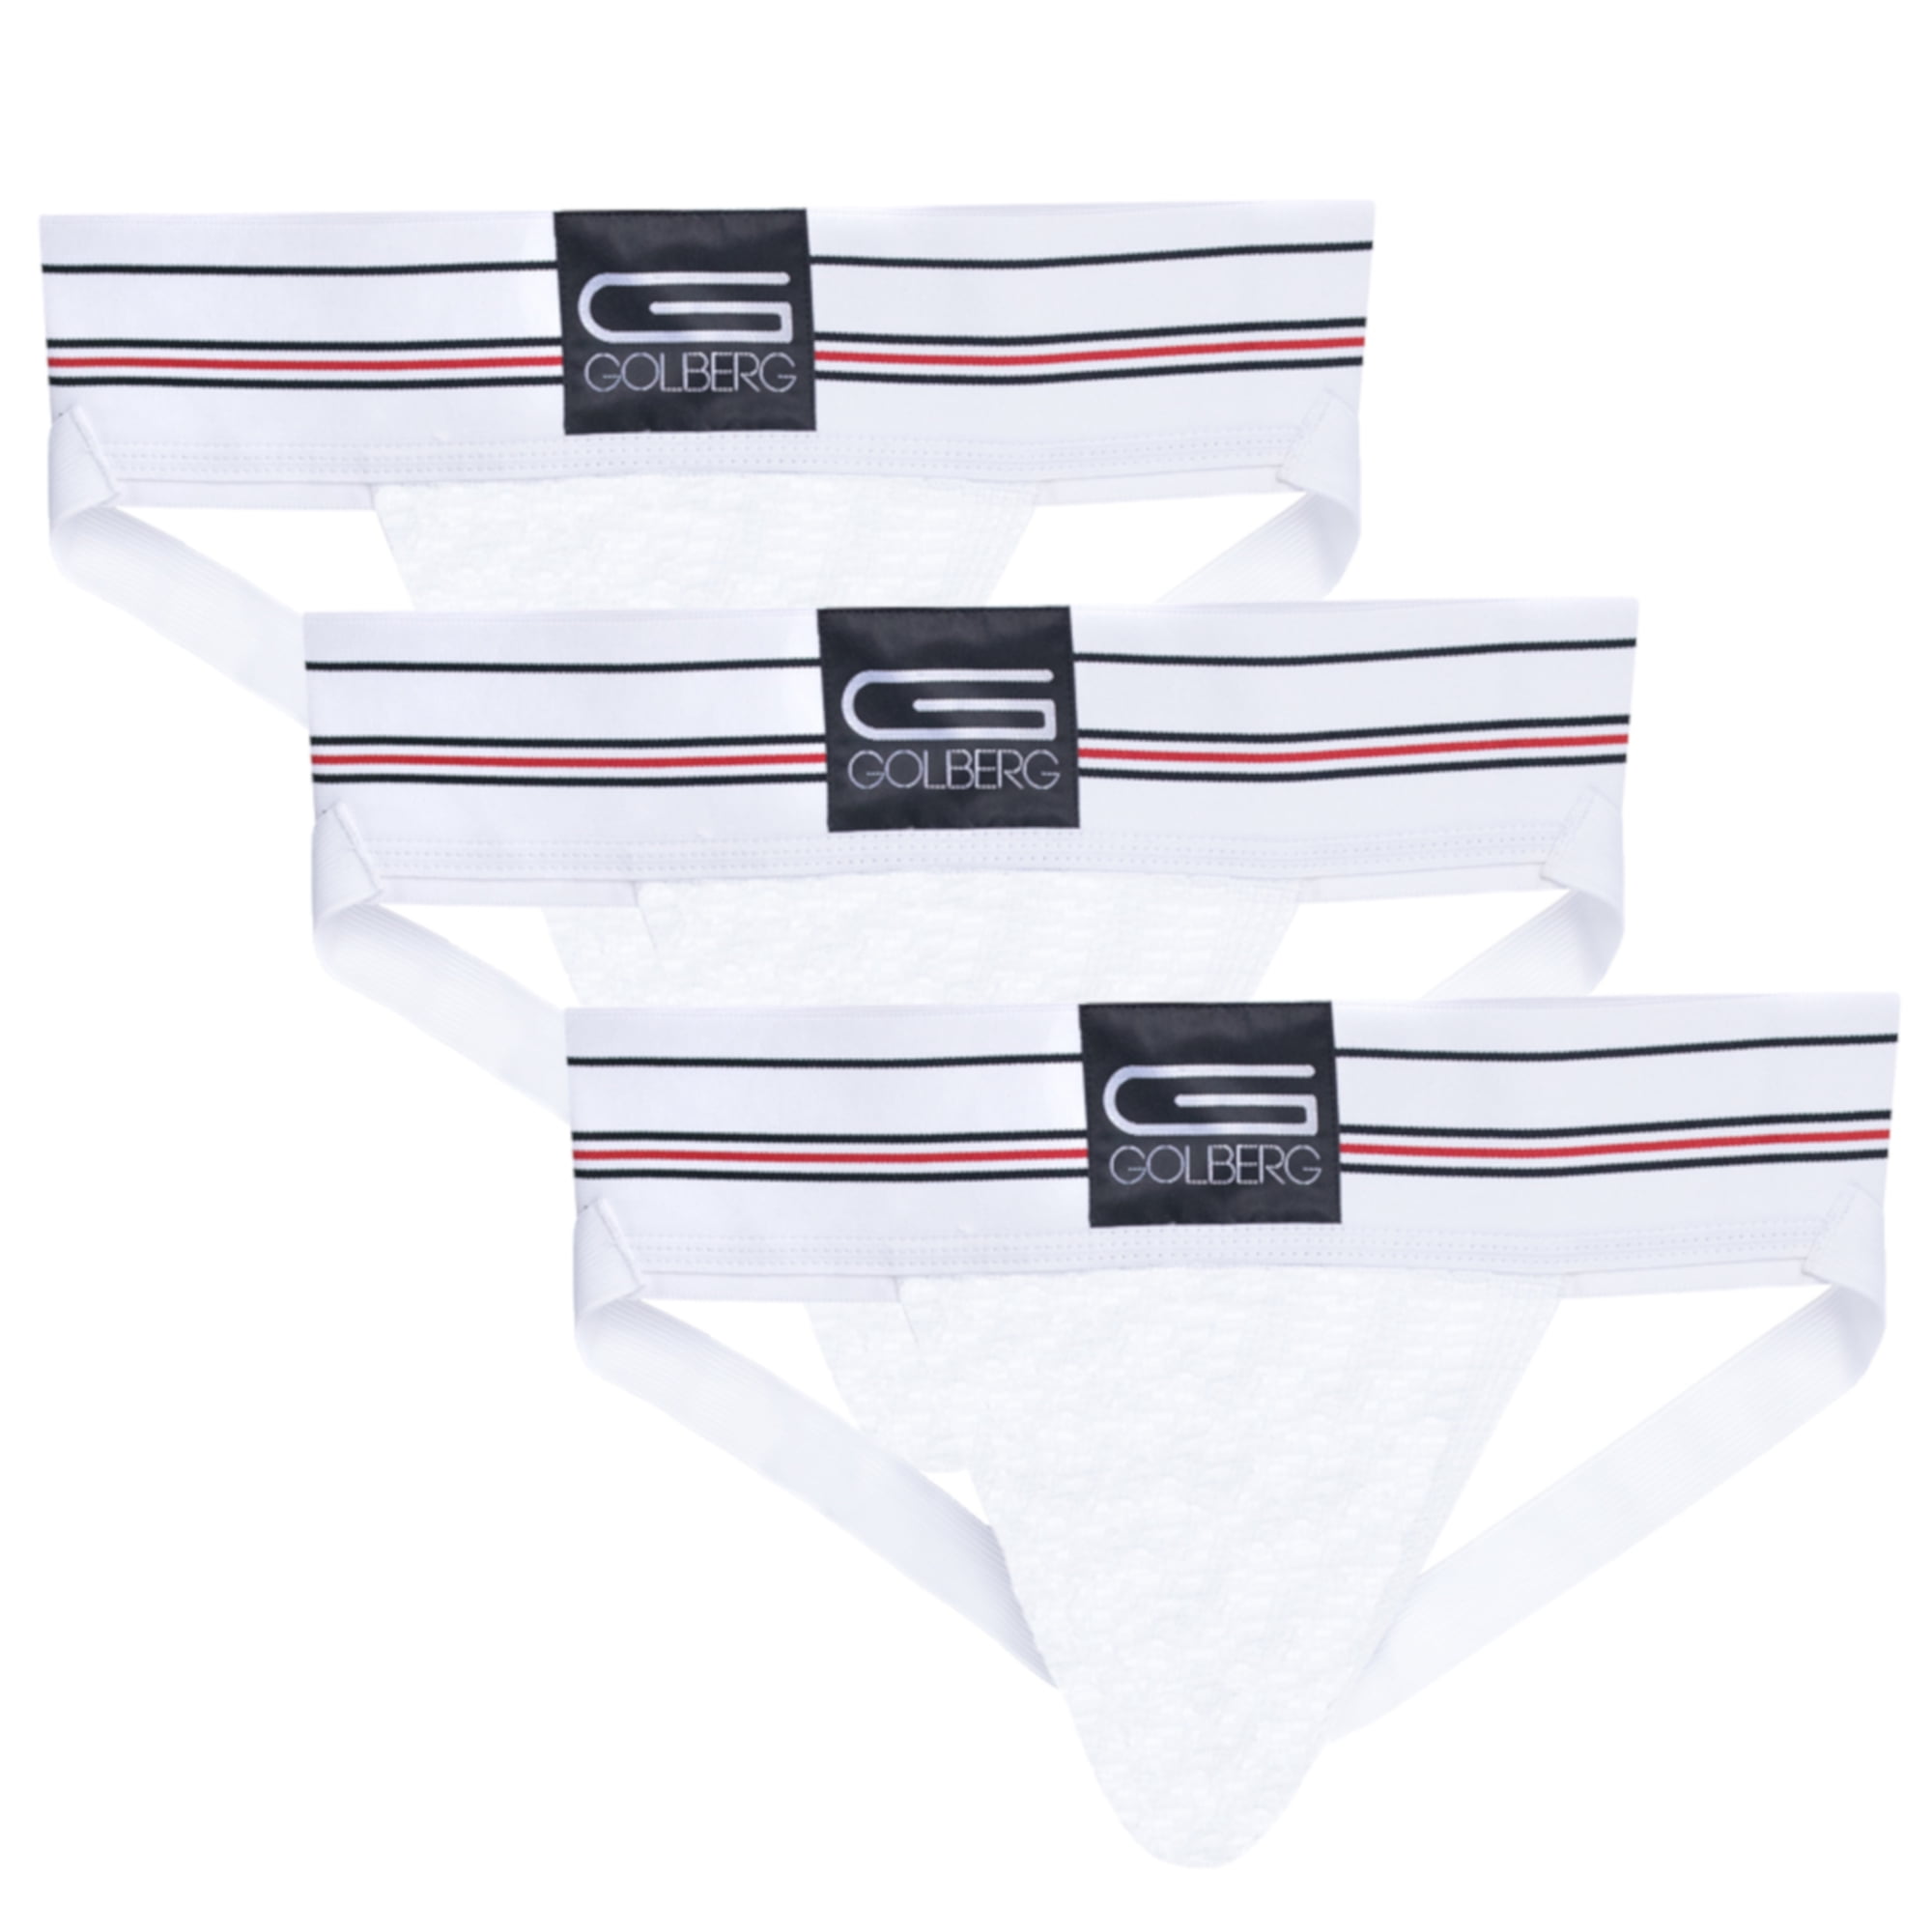 3 Packs of Multiple Colors Naturally Contoured Waistband GOLBERG Athletic Supporter 